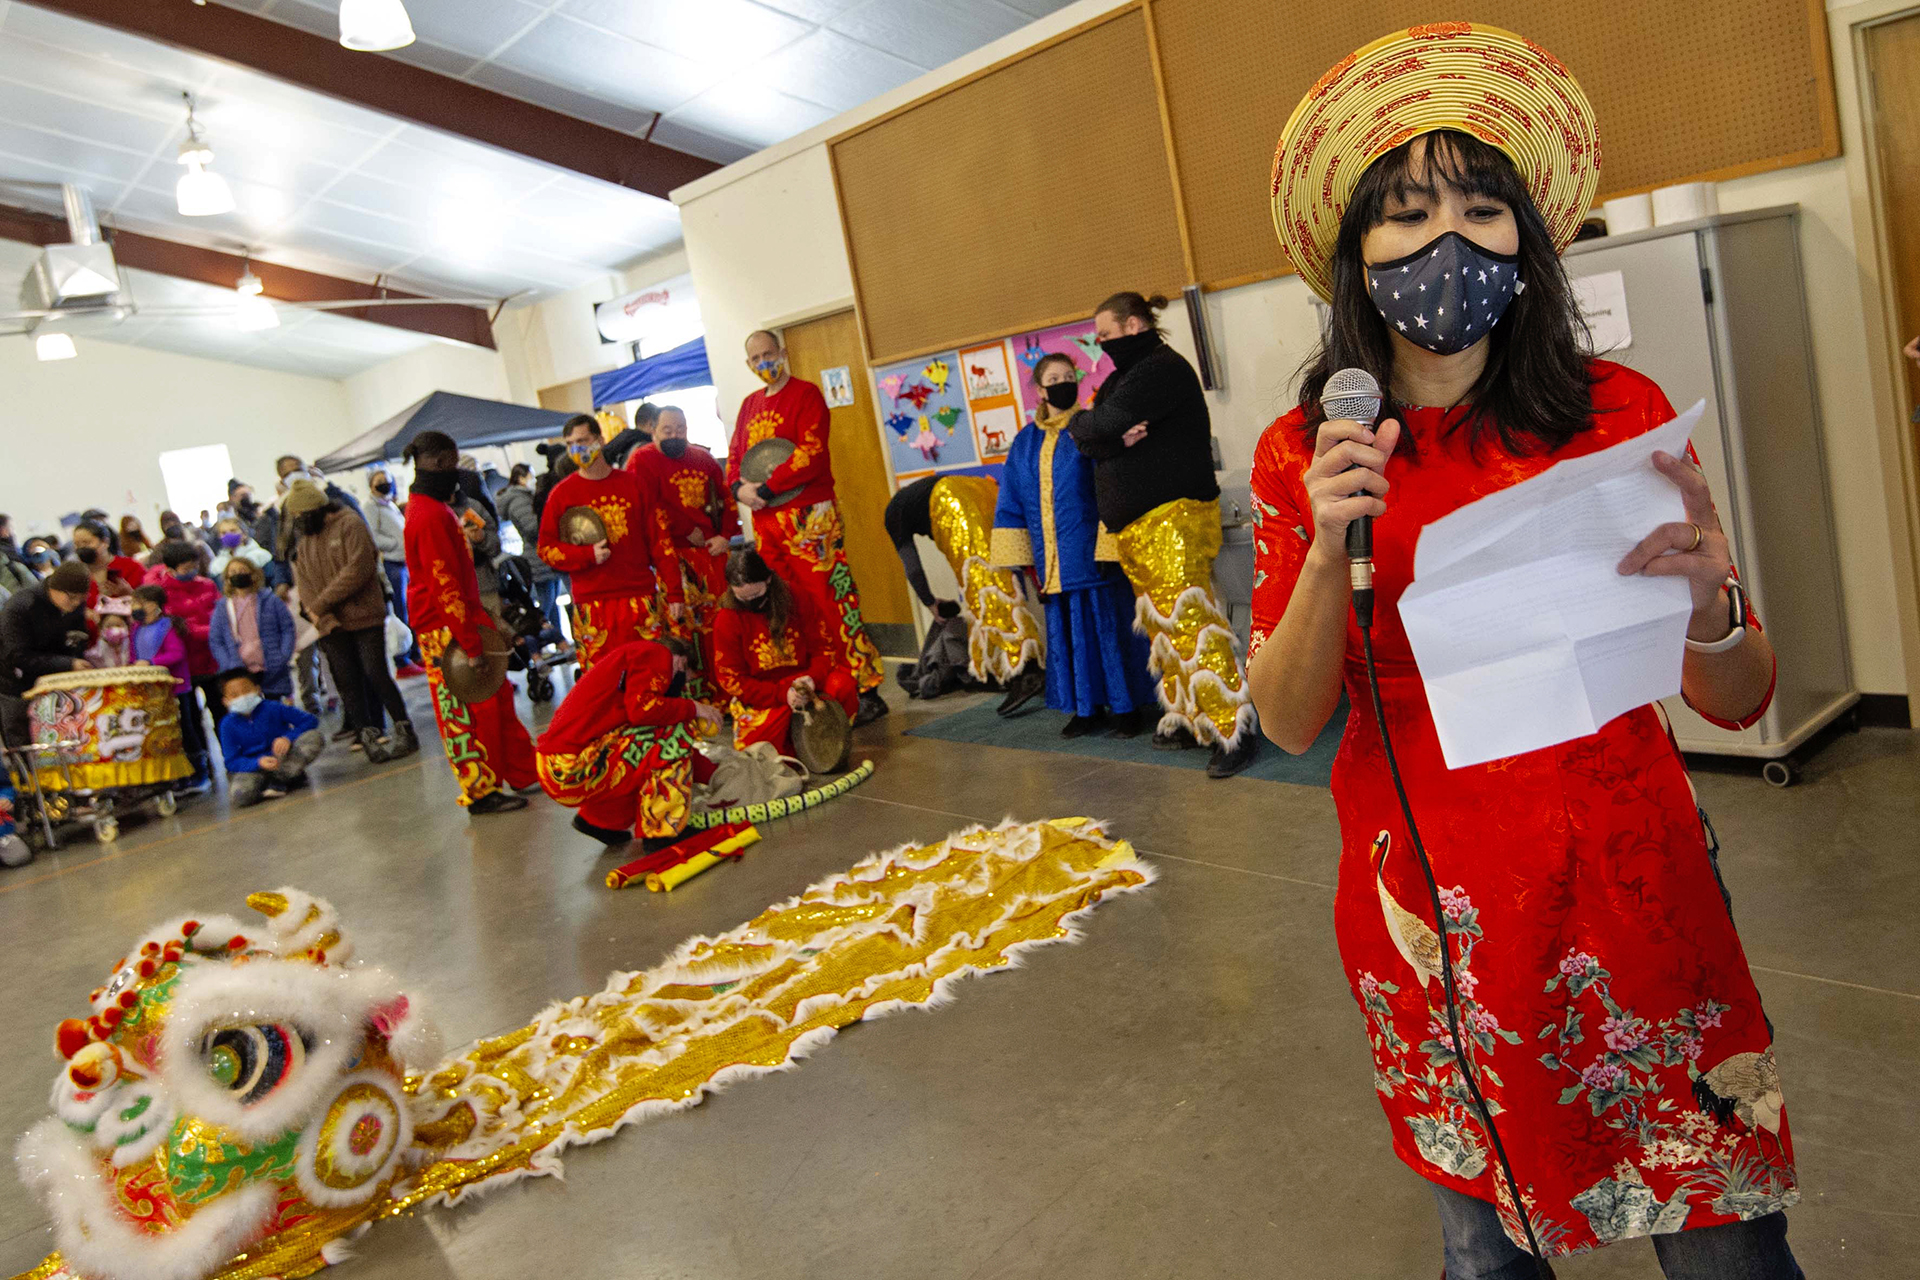 Organizer Han Pham makes announcements and introduces the Chein Hong School of Kung Fu Lion Dance performance during the Lunar New Year Celebration at Legacy Park in Decatur on Saturday, Jan. 29. 2022. Photo by Dean Hesse.